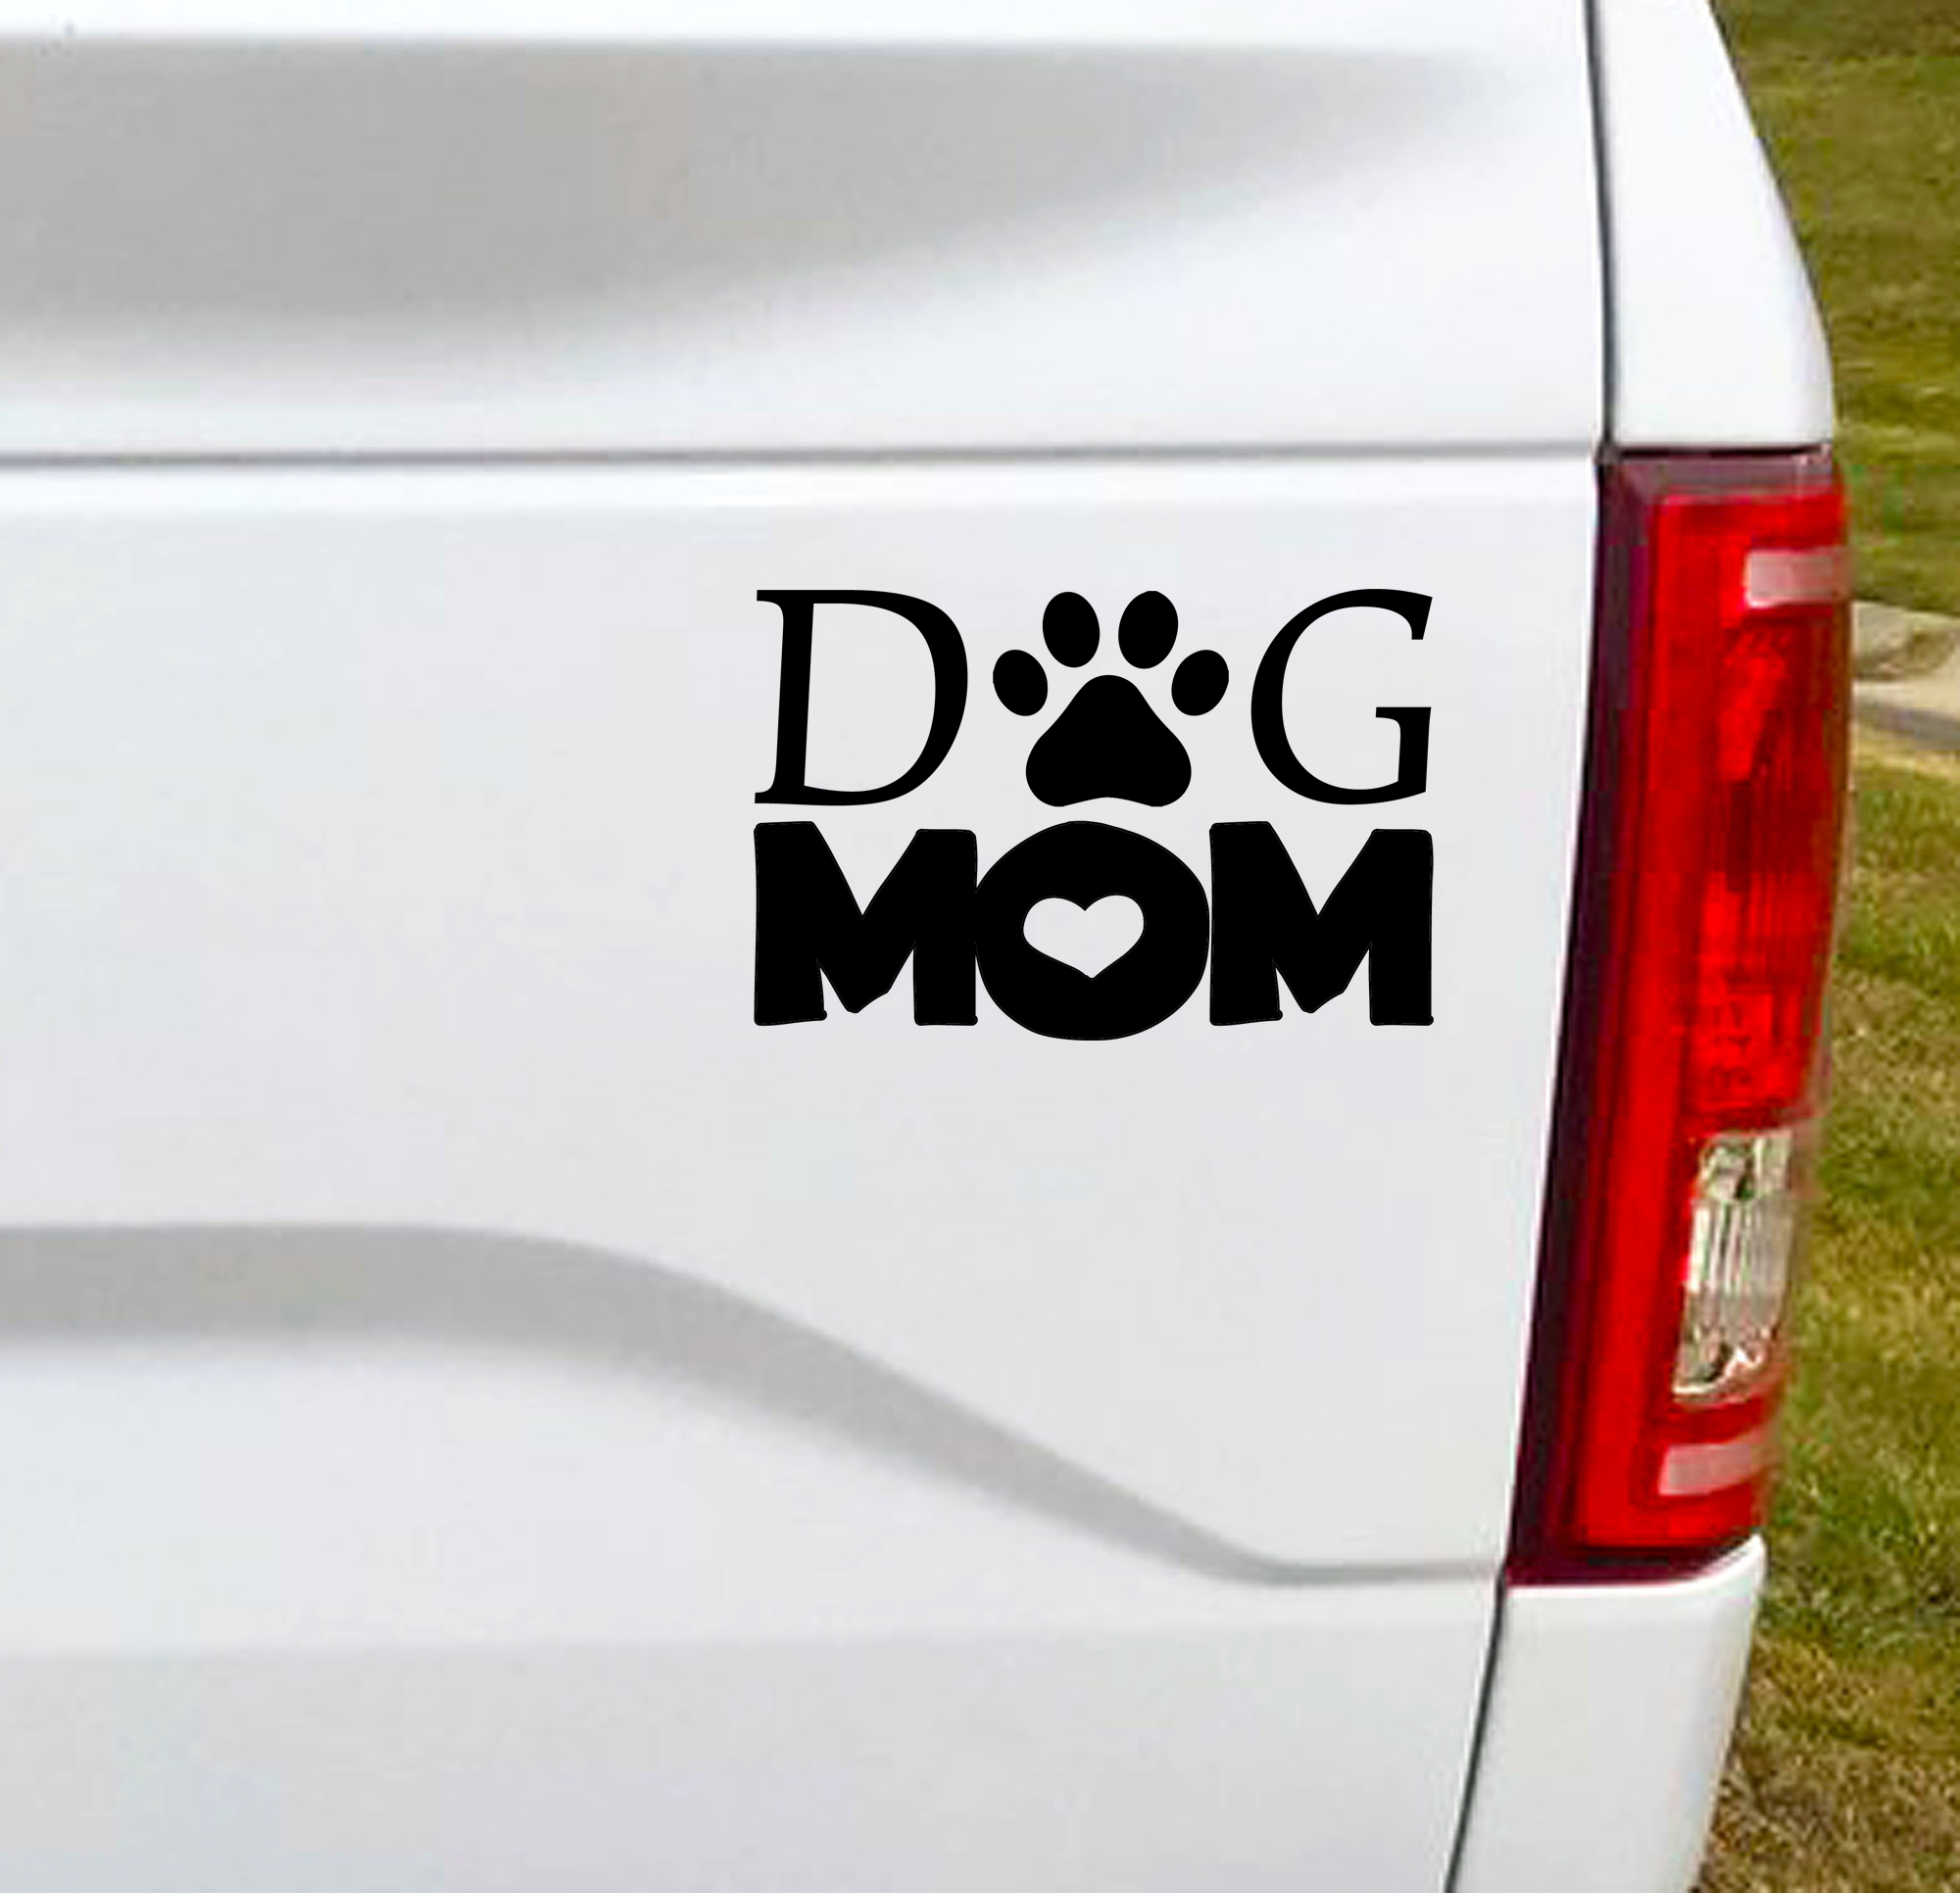 Dog Mom Vinyl Car Decal Bumper Sticker. Let the world owner you are a proud fur-baby Momma!  4.5"W x 3"H Funny Car Decal, Car Sticker, Car Vinyl, Bumper Sticker, Vinyl Stickers, Vinyl Sticker.